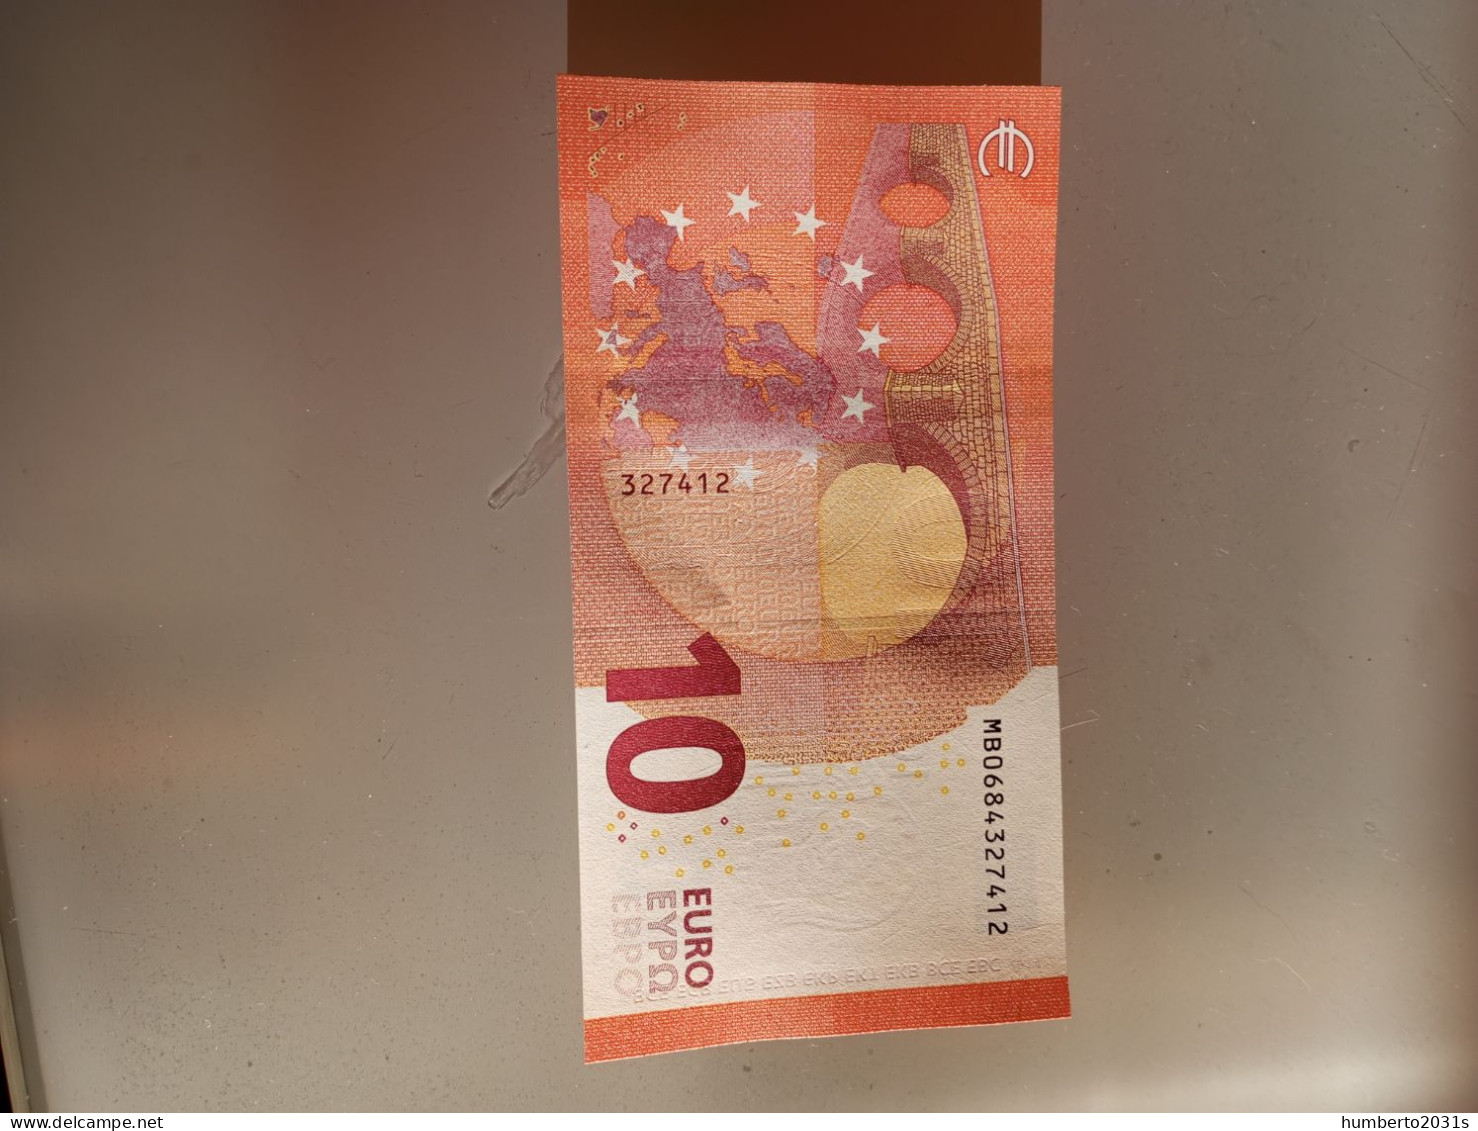 Sell A New Banknote 10 Euros Portugal MB Unc - 10 Euro